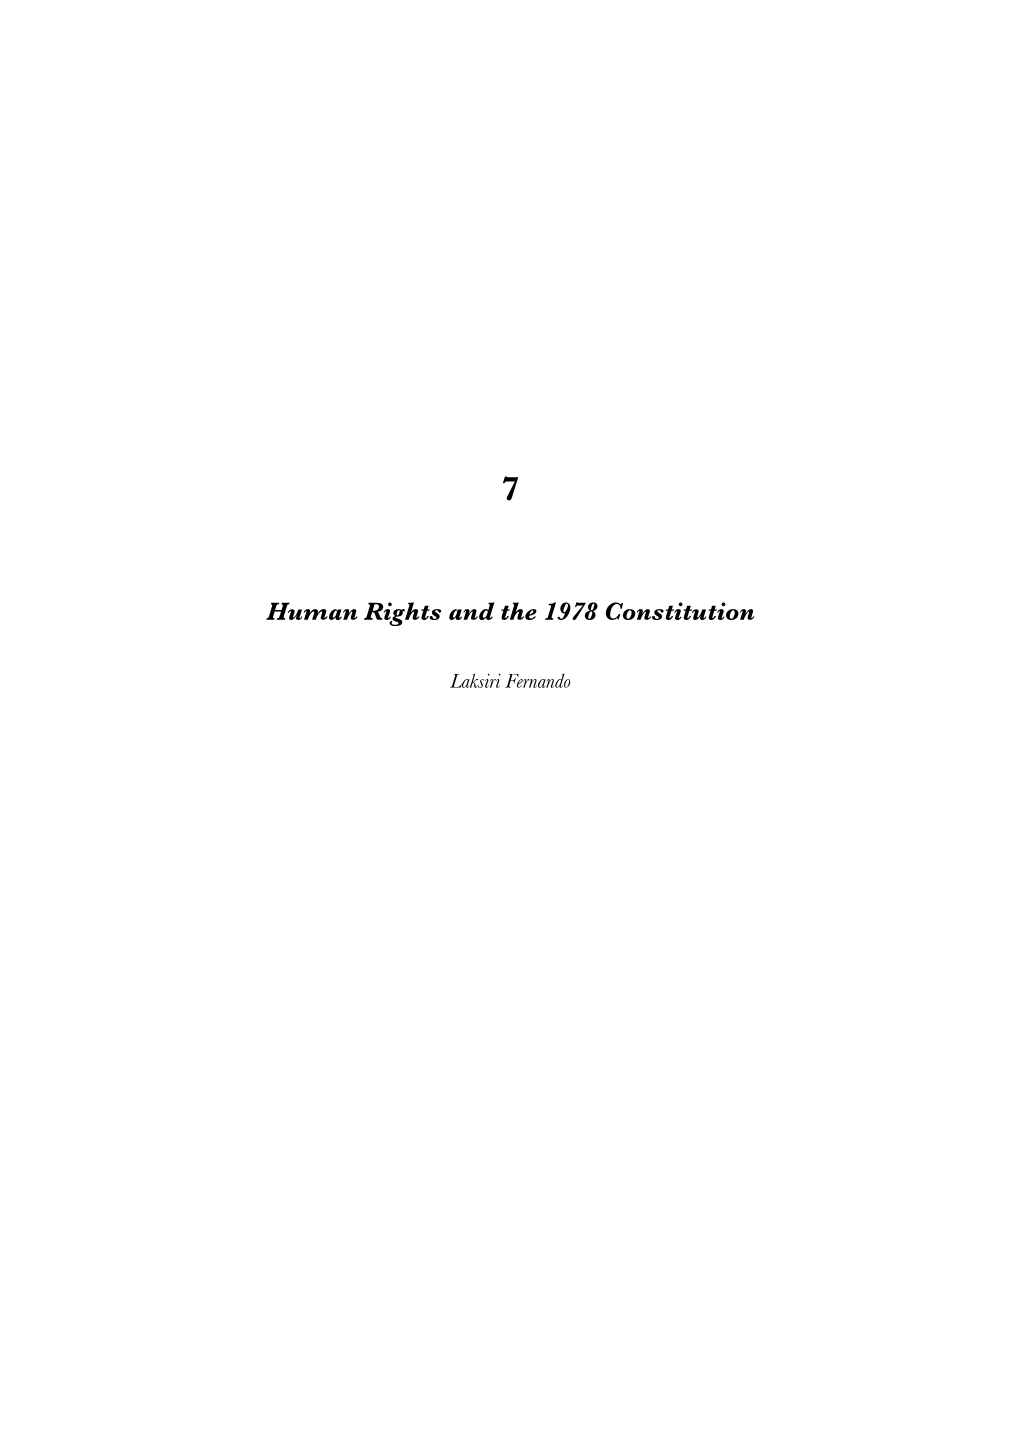 Human Rights and the 1978 Constitution